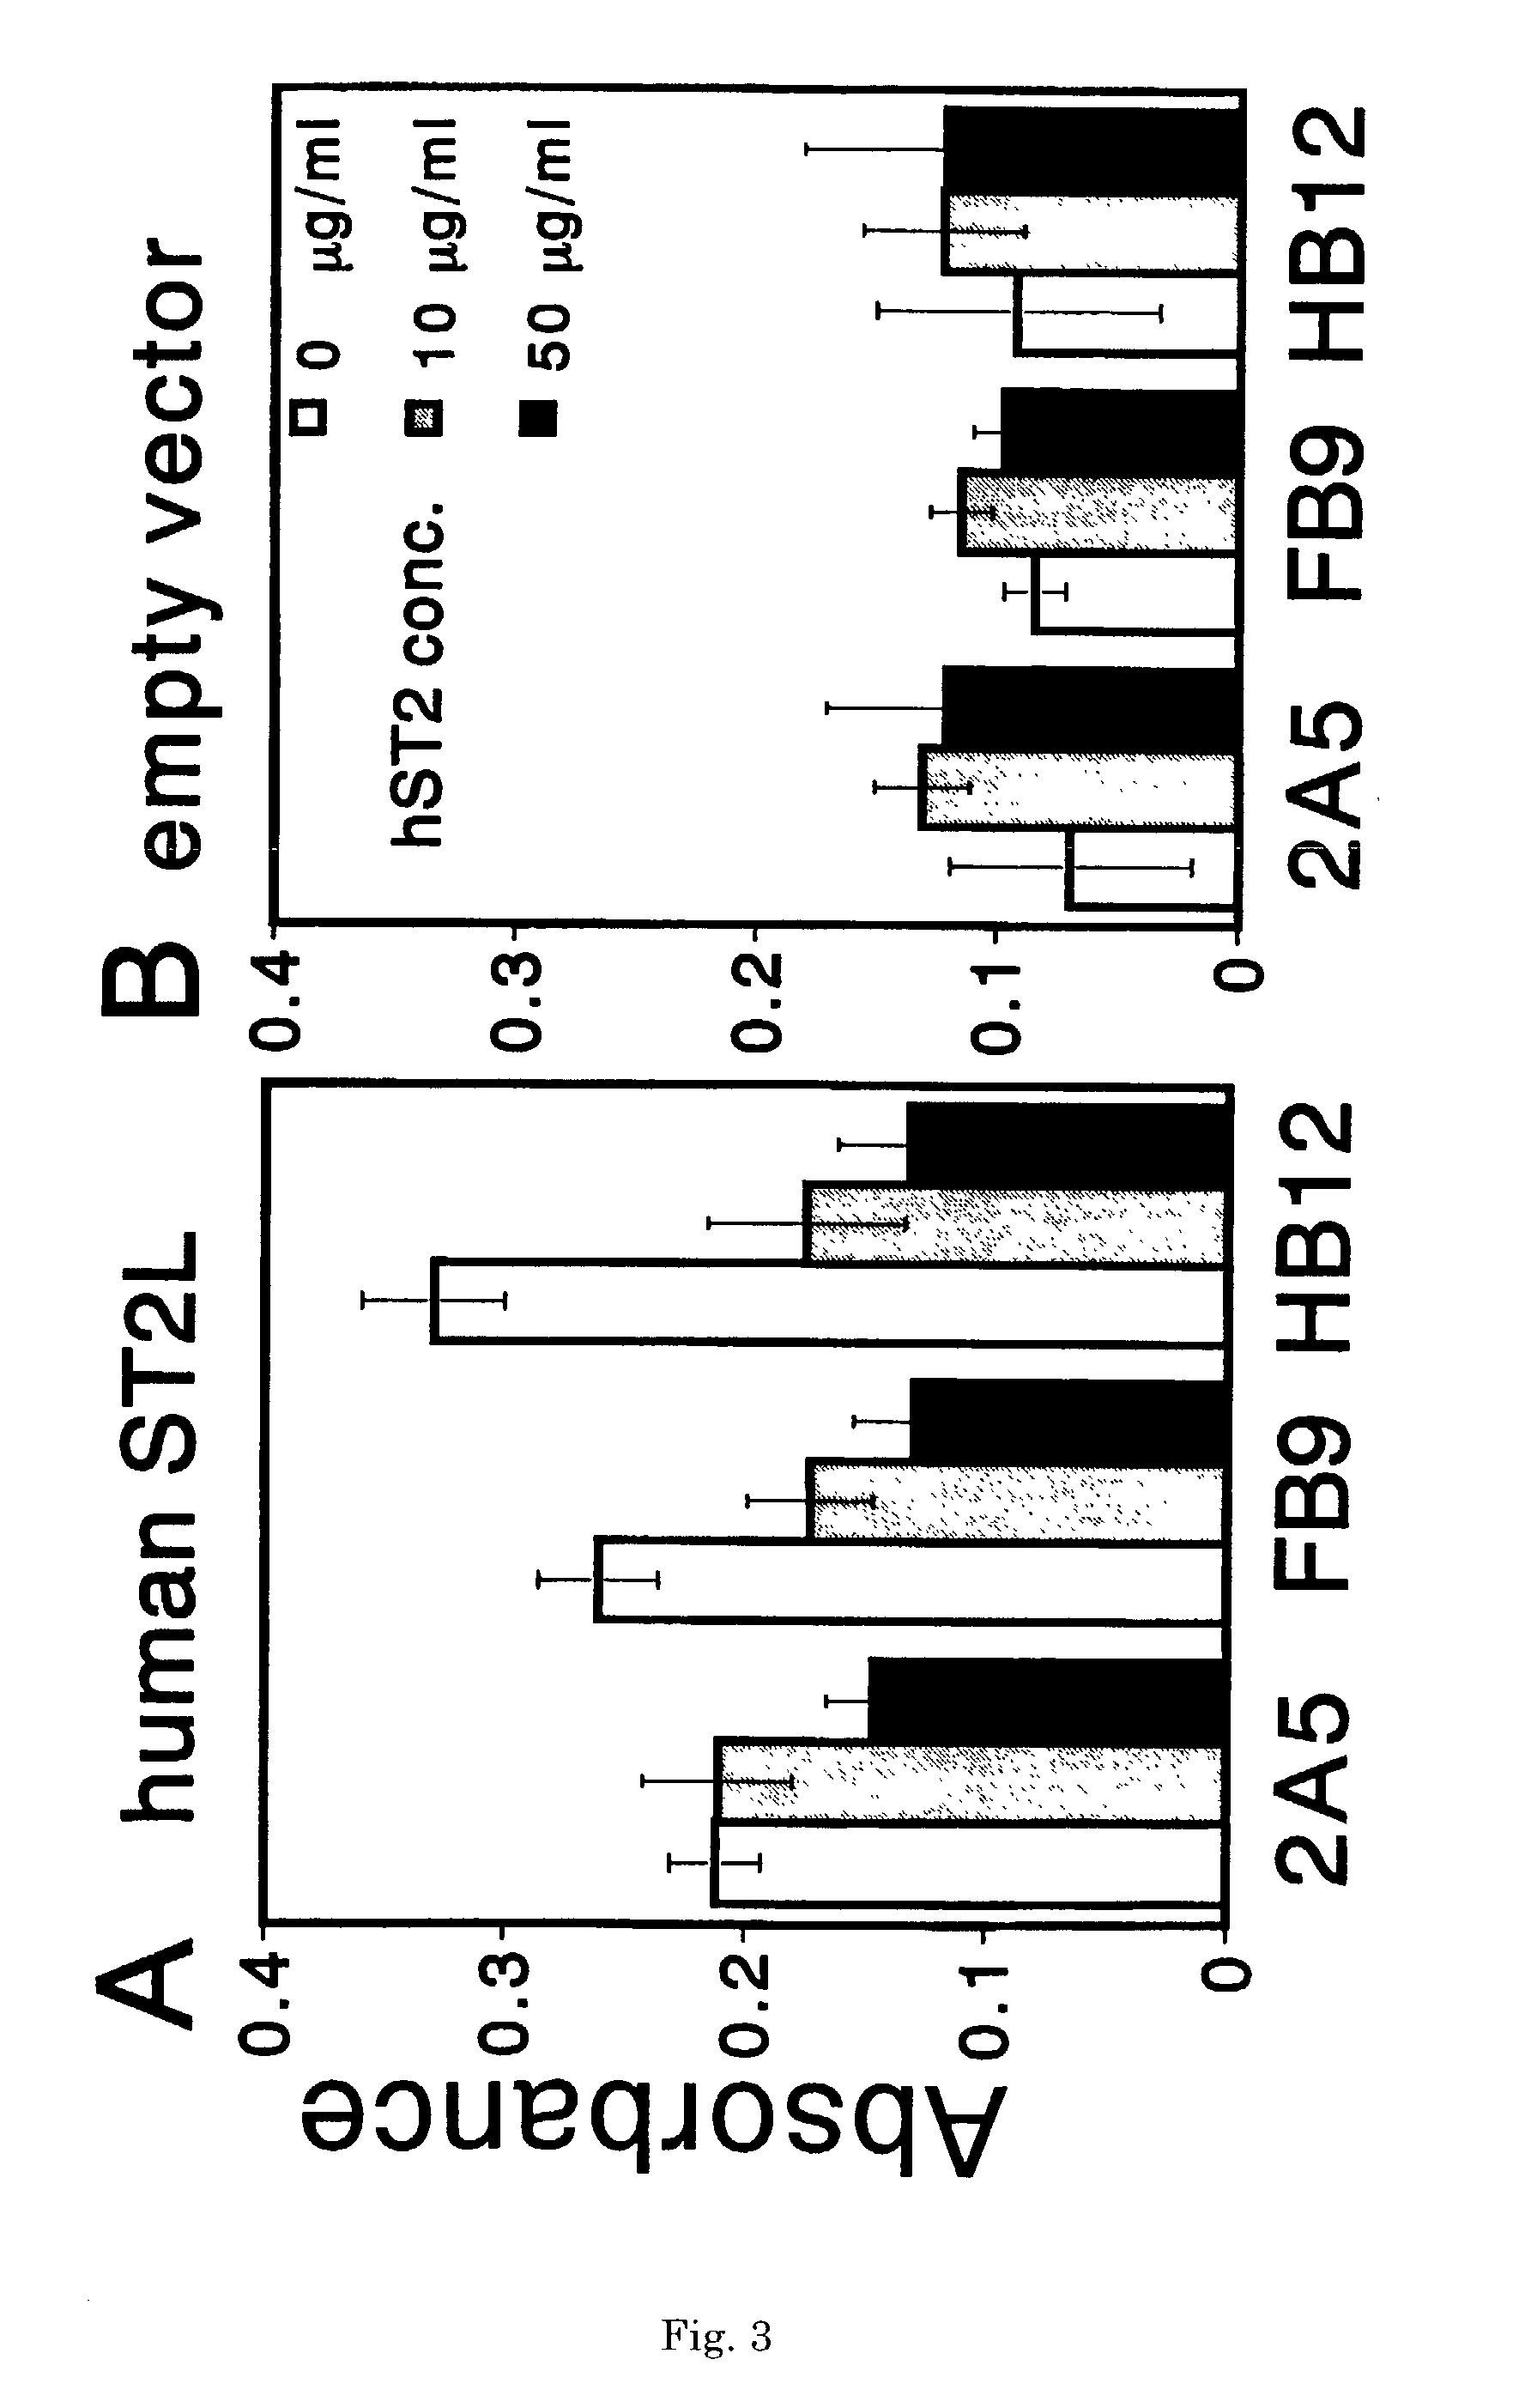 Monoclonal antibody and method and kit for immunoassay of soluble human ST2